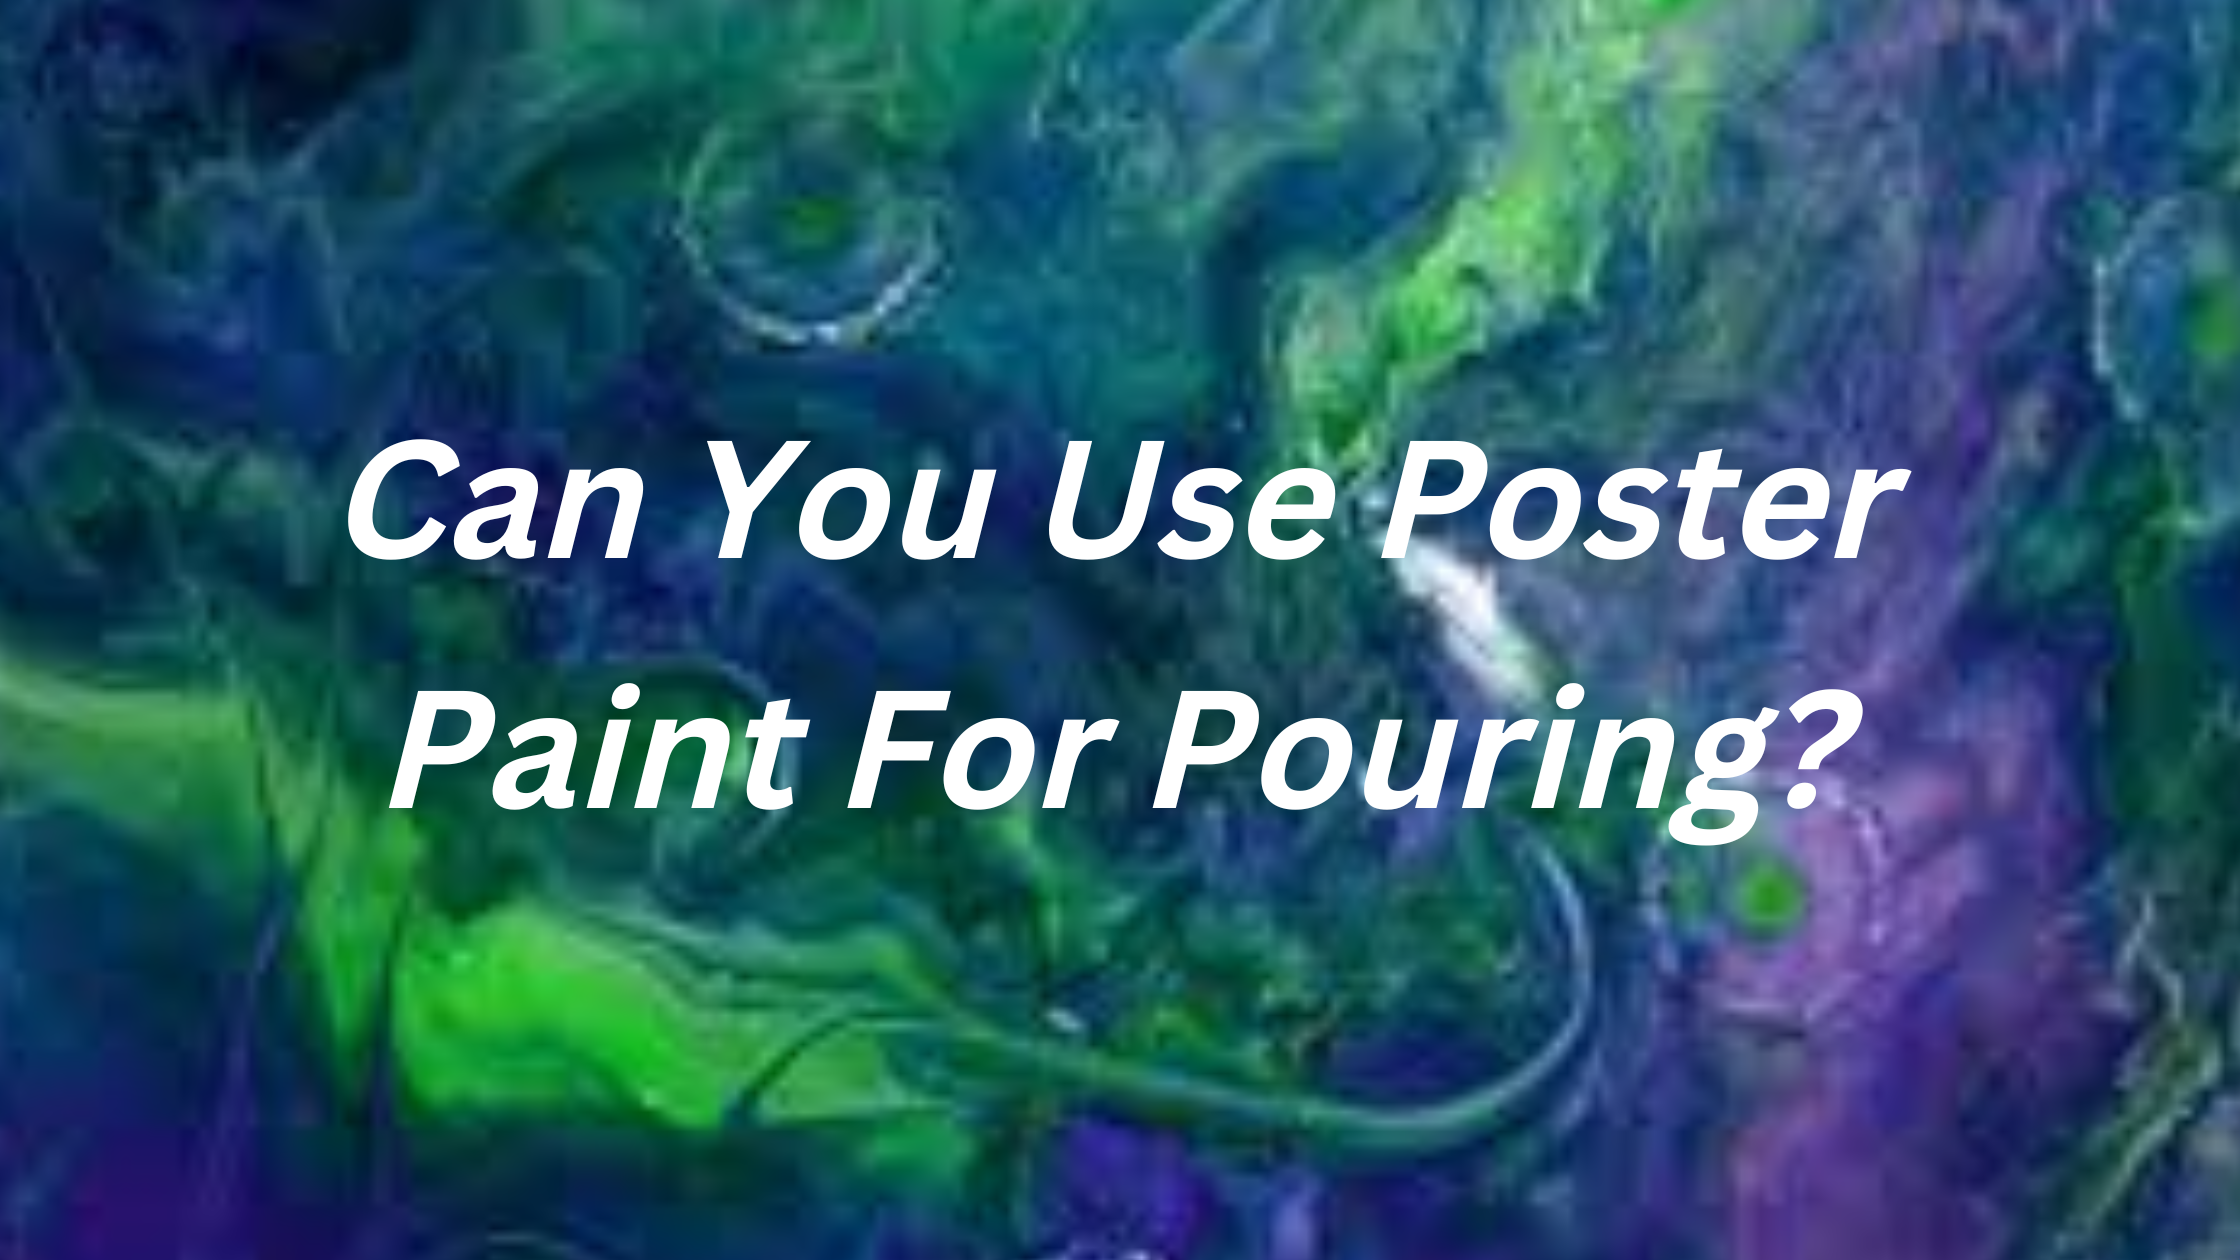 Can You Use Poster Paint For Pouring